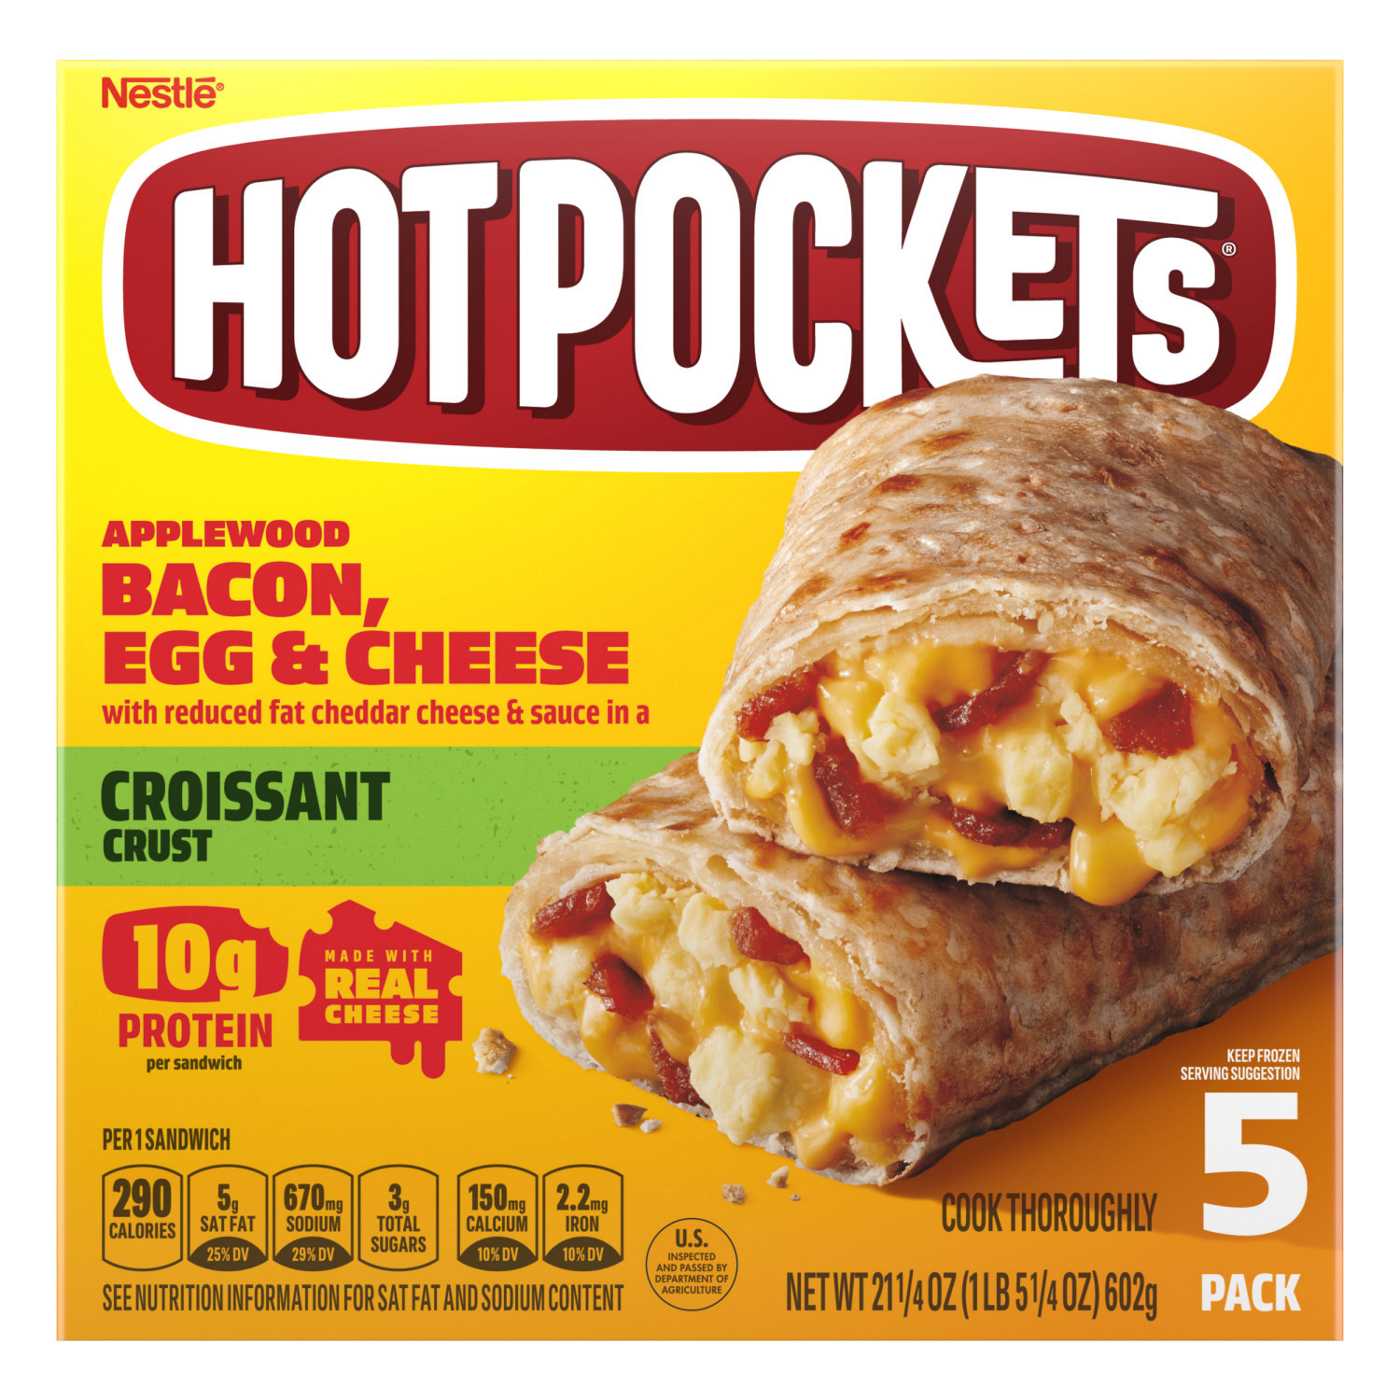 Hot Pockets Bacon Egg & Cheese Croissant Crust Frozen Sandwiches; image 1 of 8